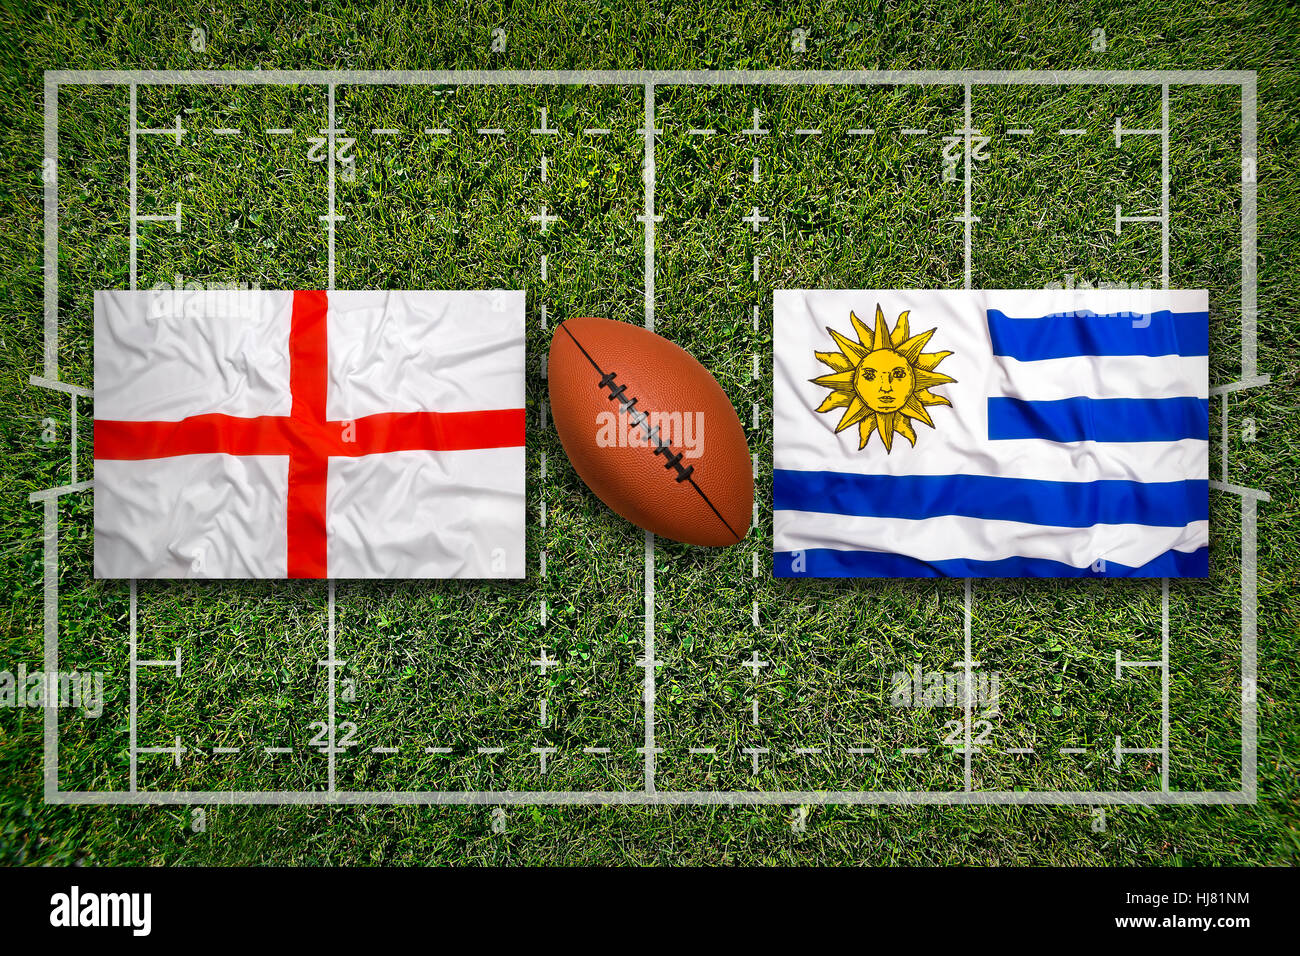 England vs. Uruguay flags on green rugby field Stock Photo